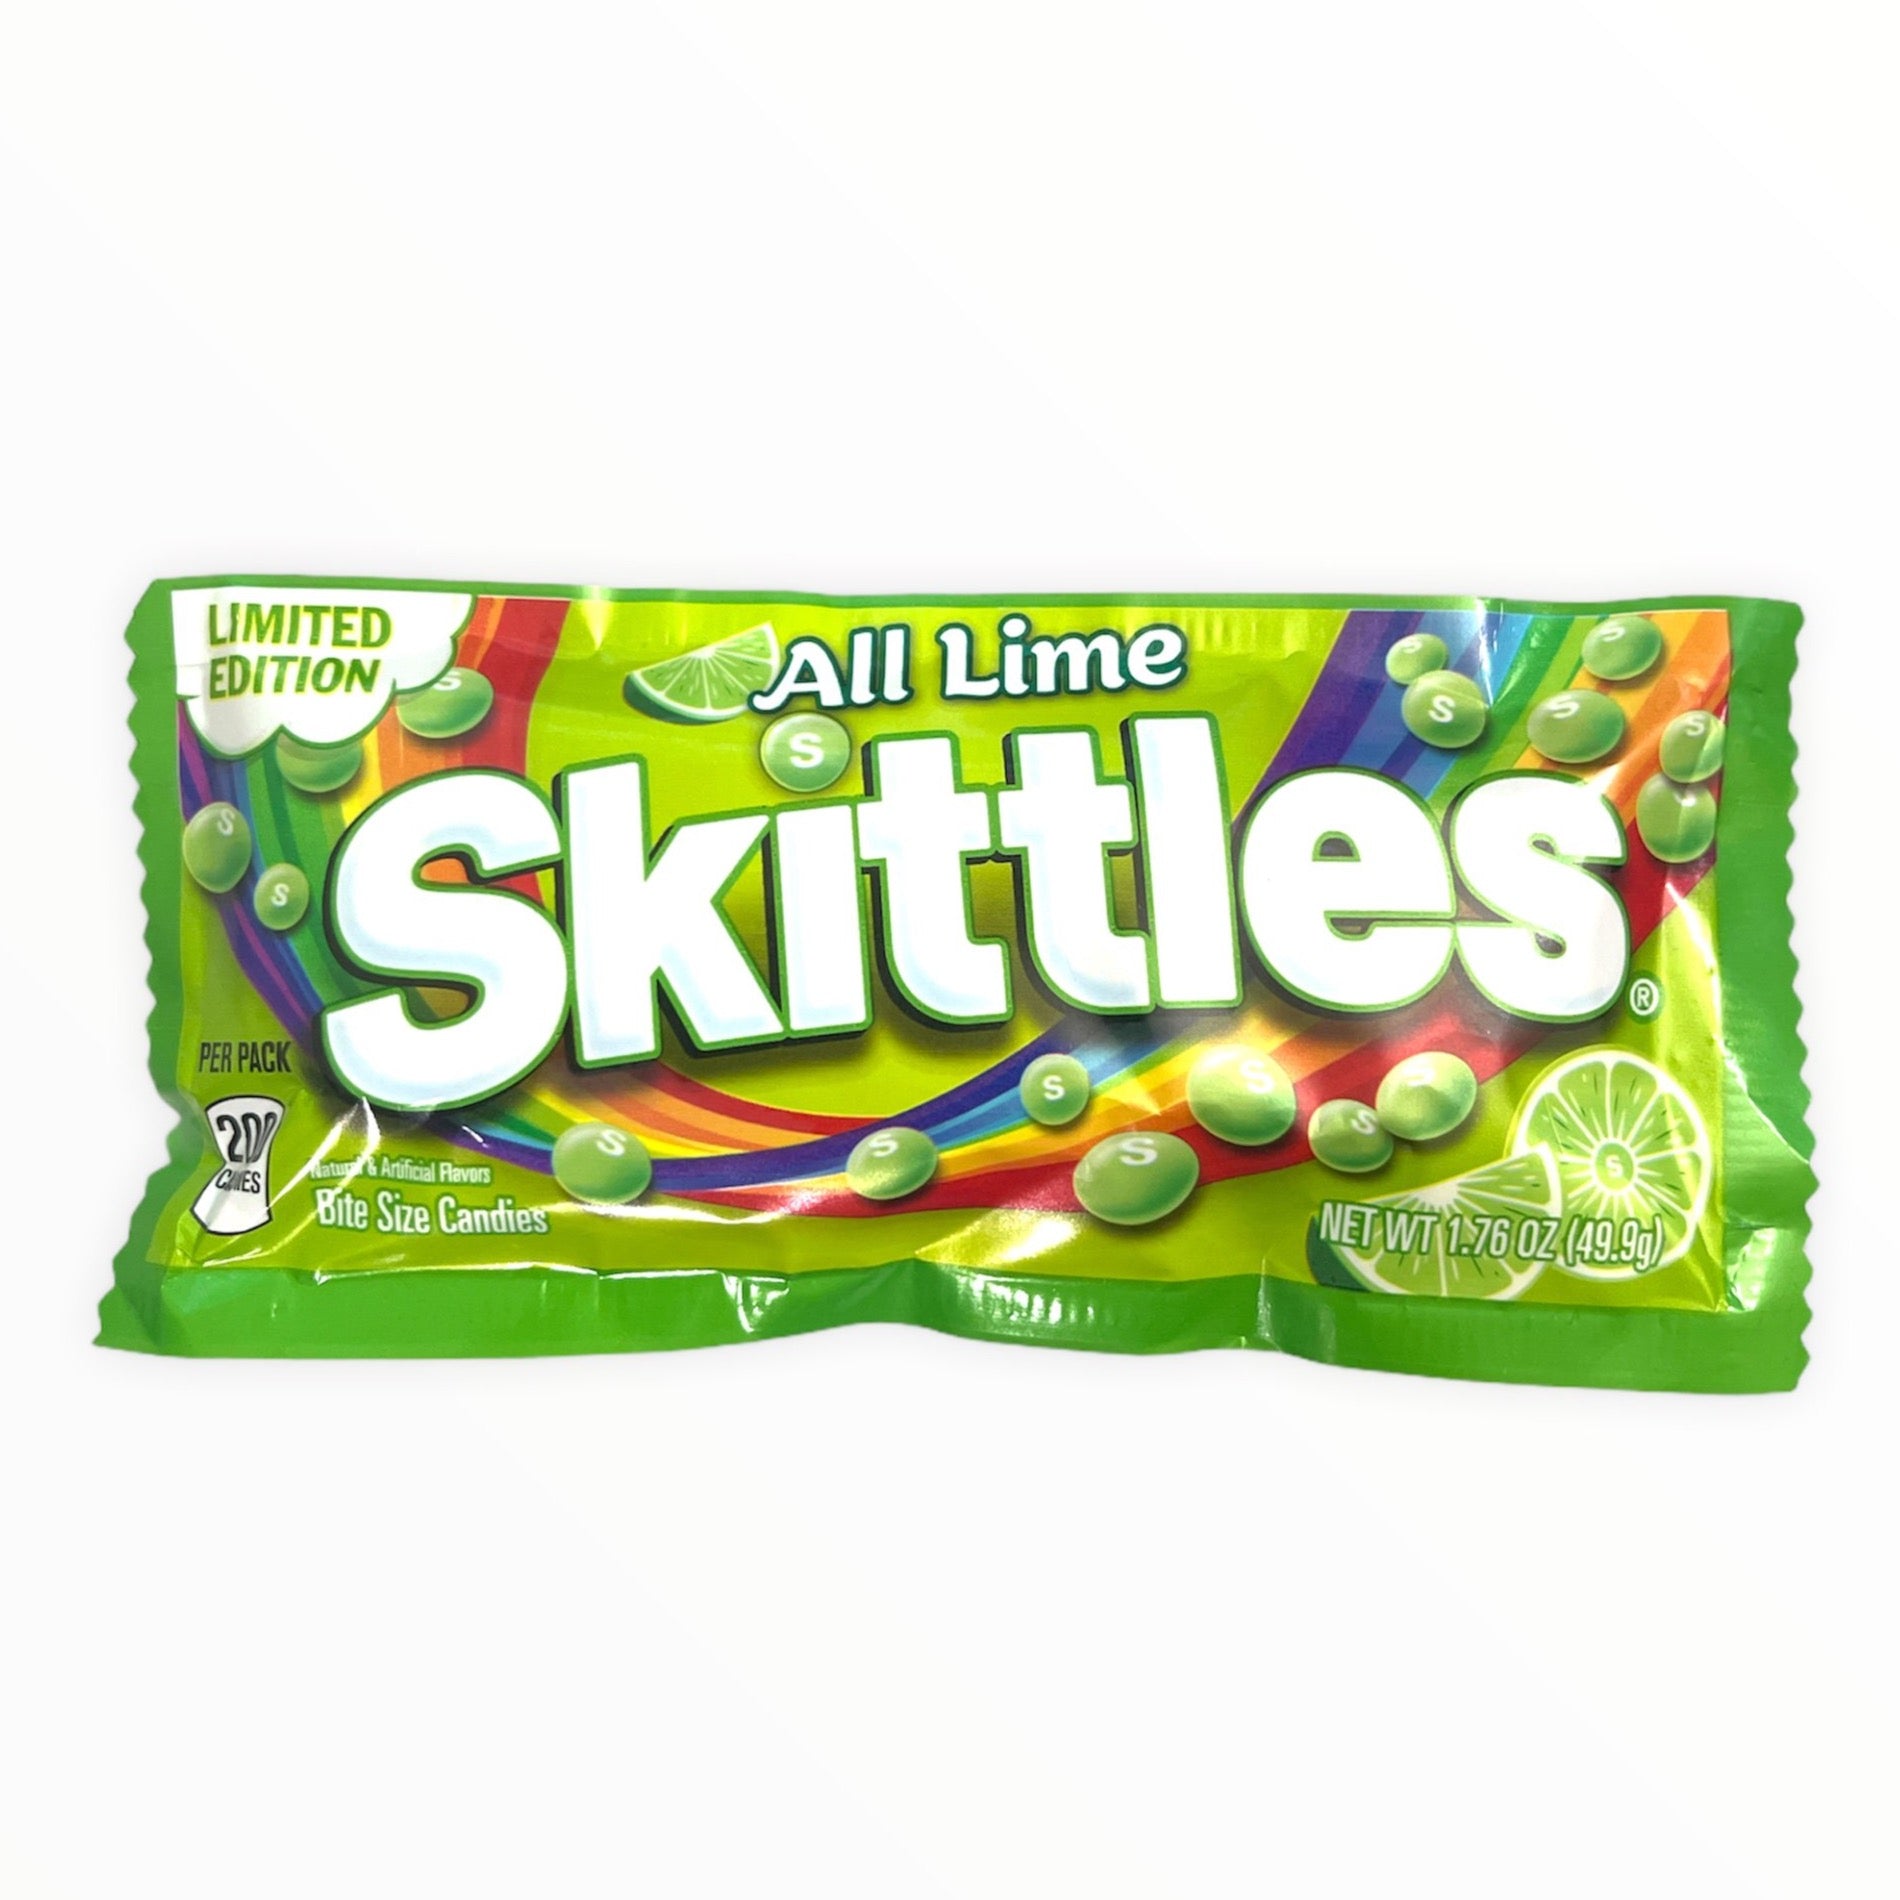 Skittles All Lime, Limited Edition, 1.76oz